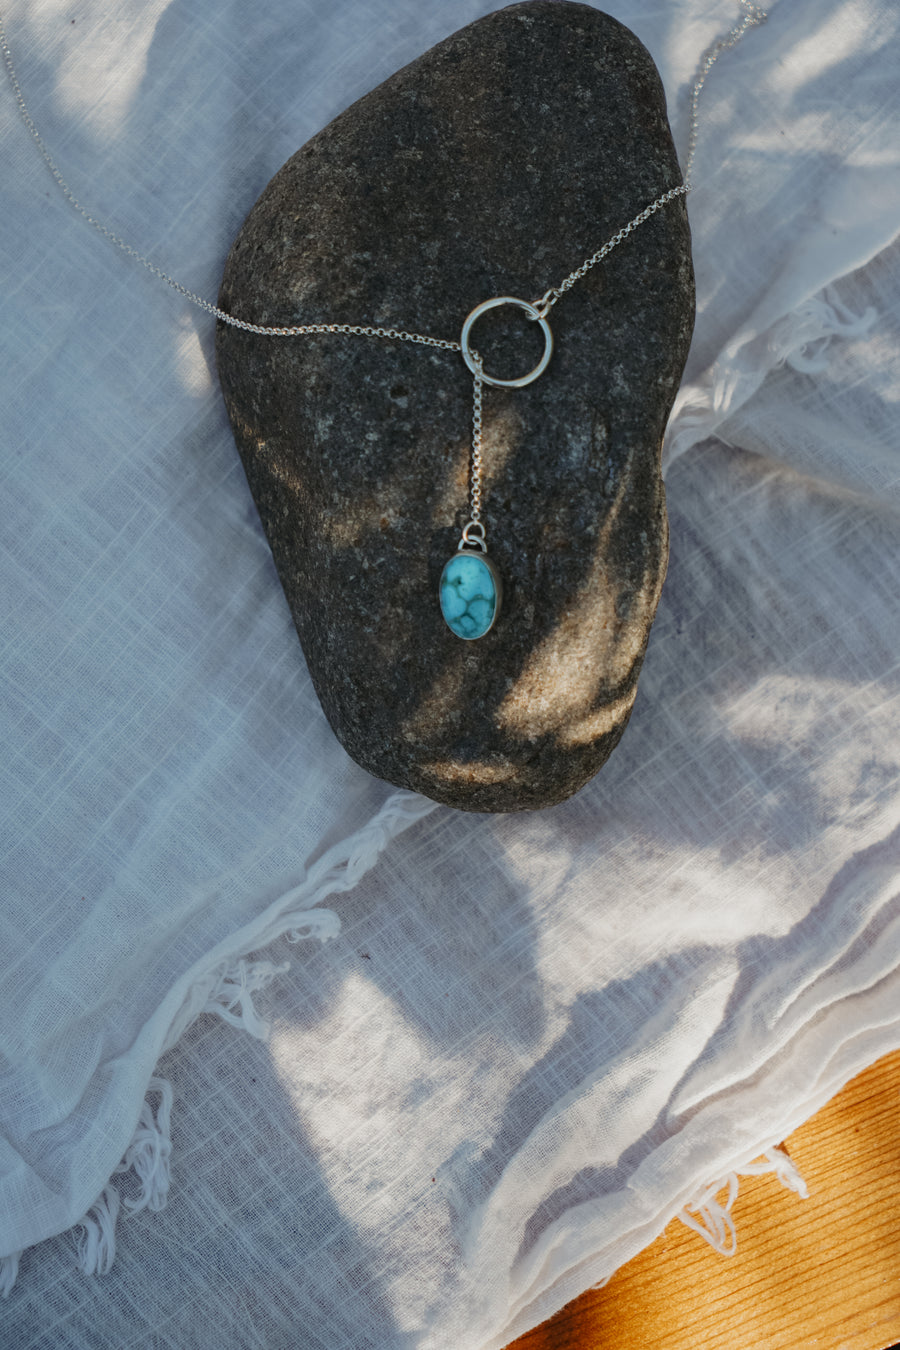 The Dainty Lariat in Turquoise Mountain